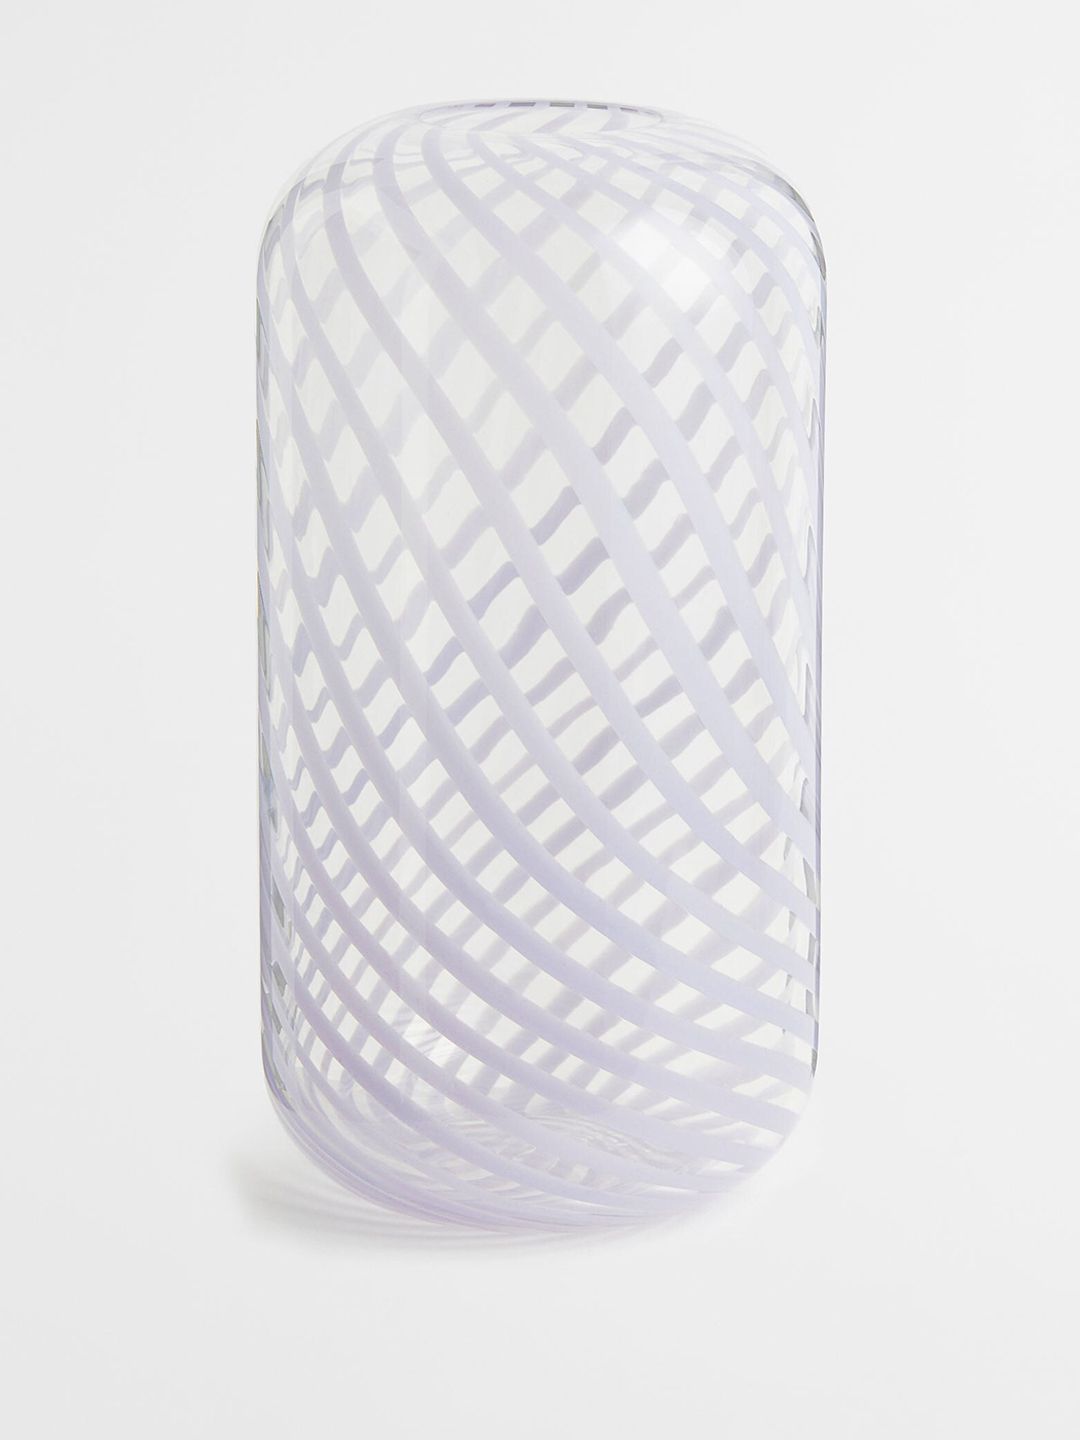 H&M Patterned Glass Vase Price in India